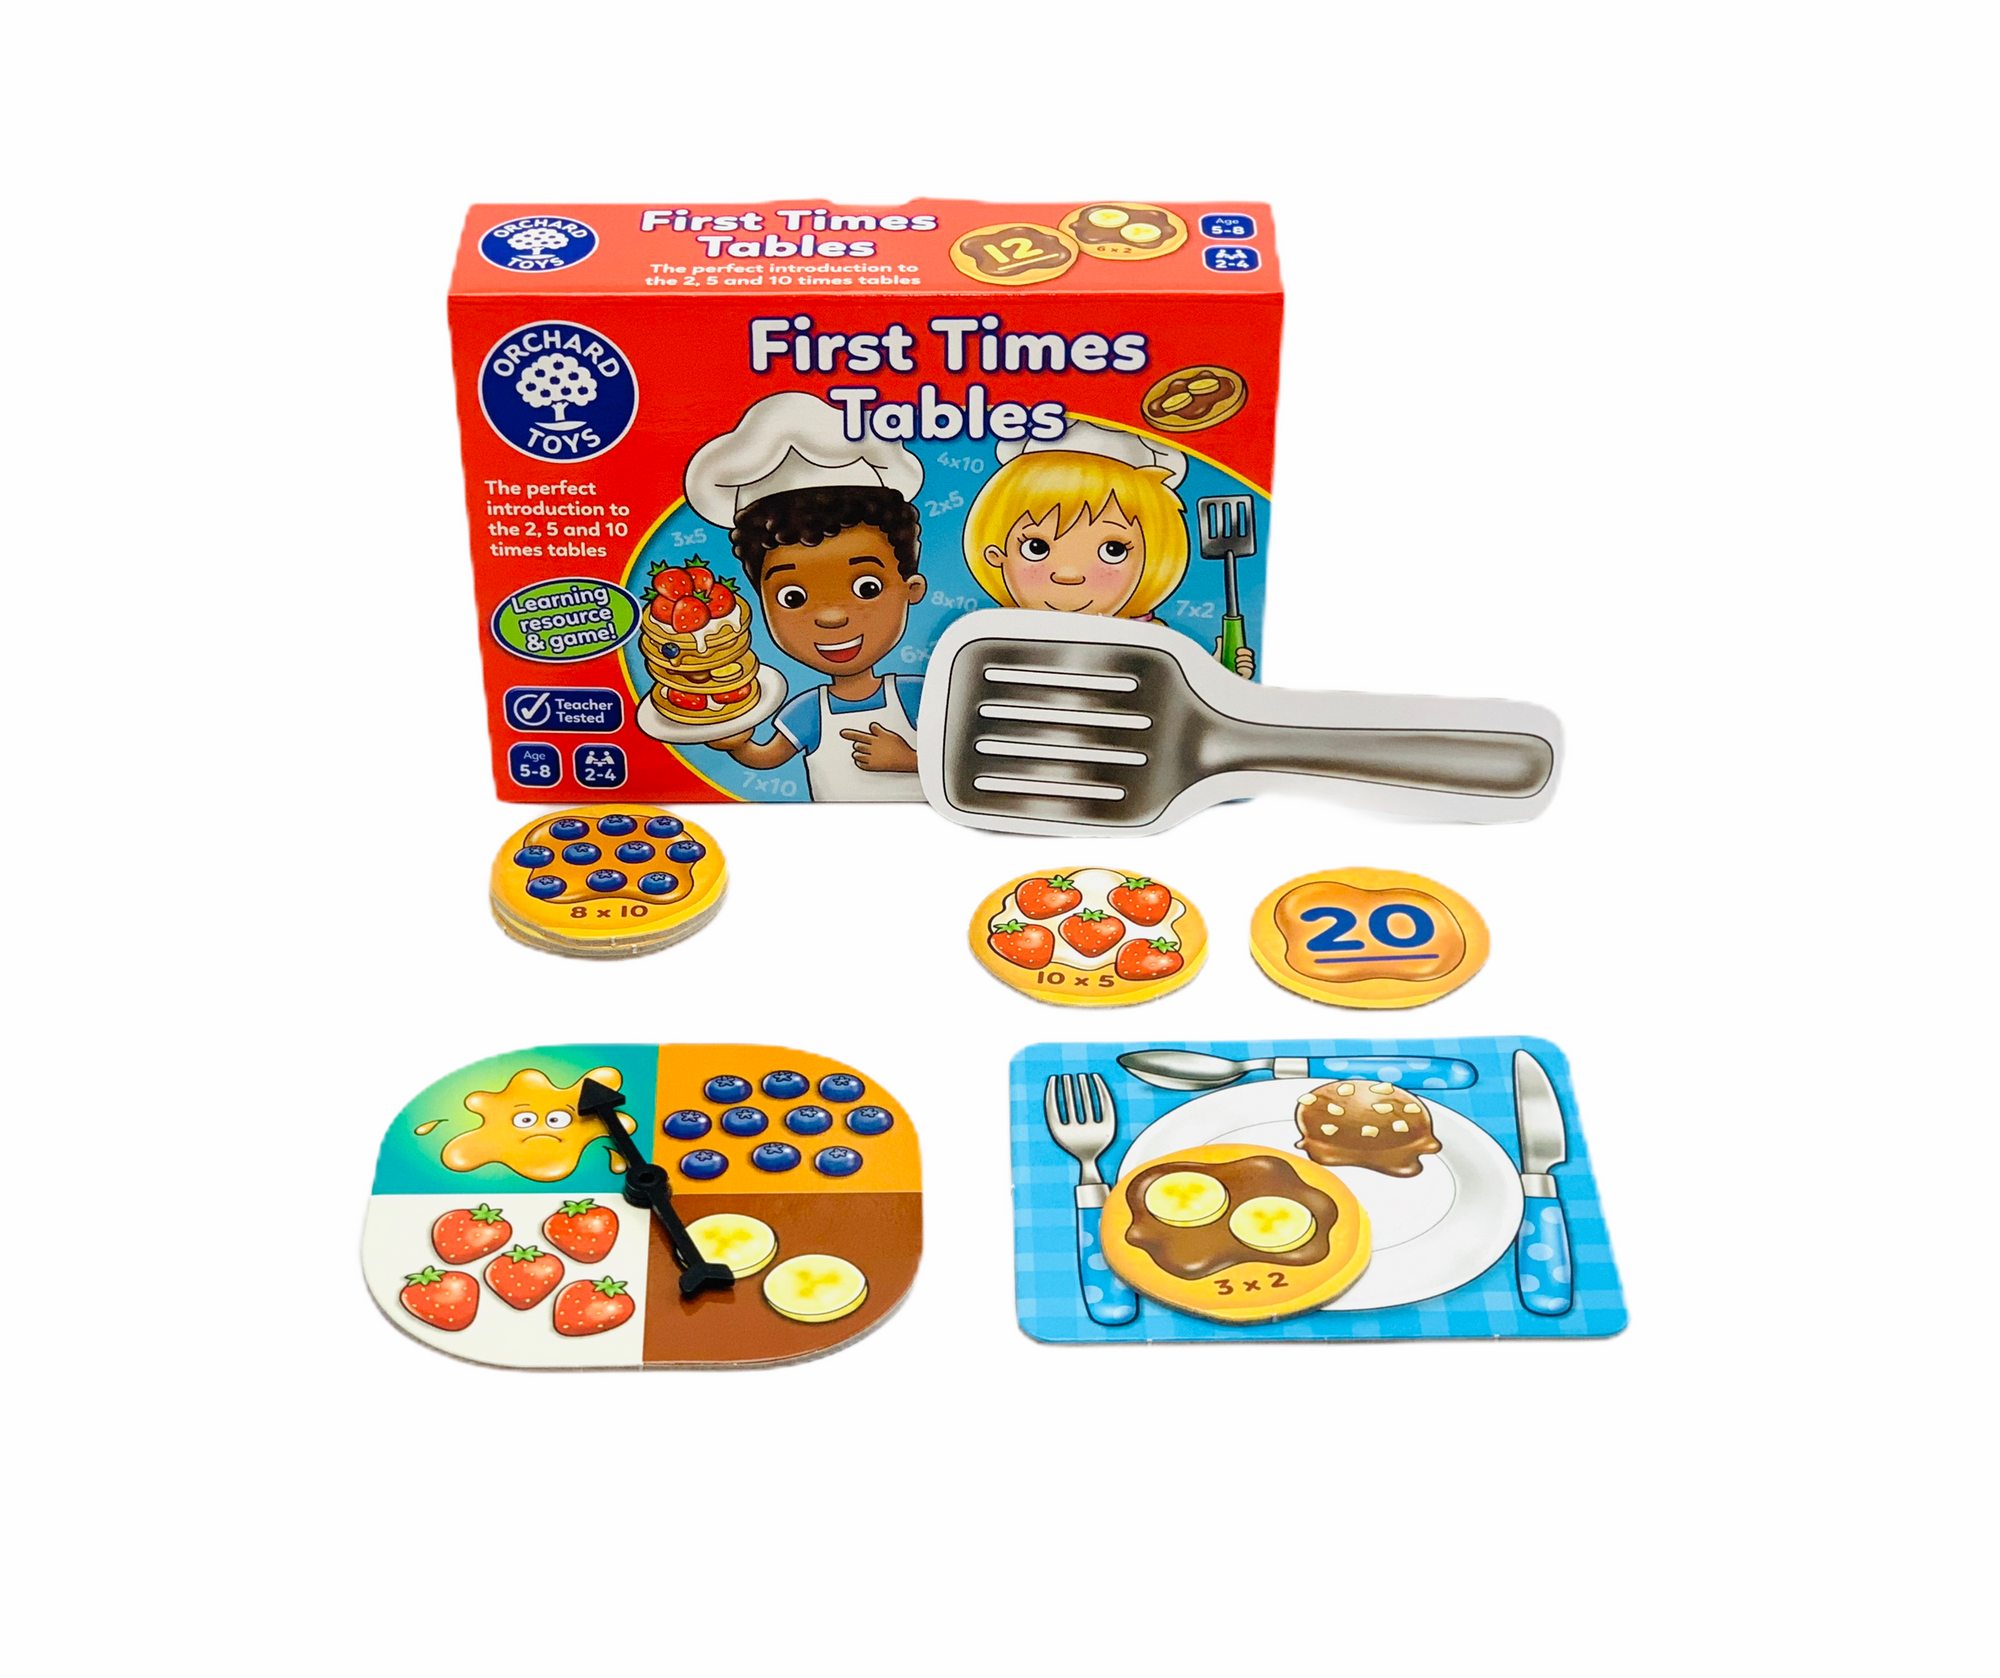 Orchard First Times tables game